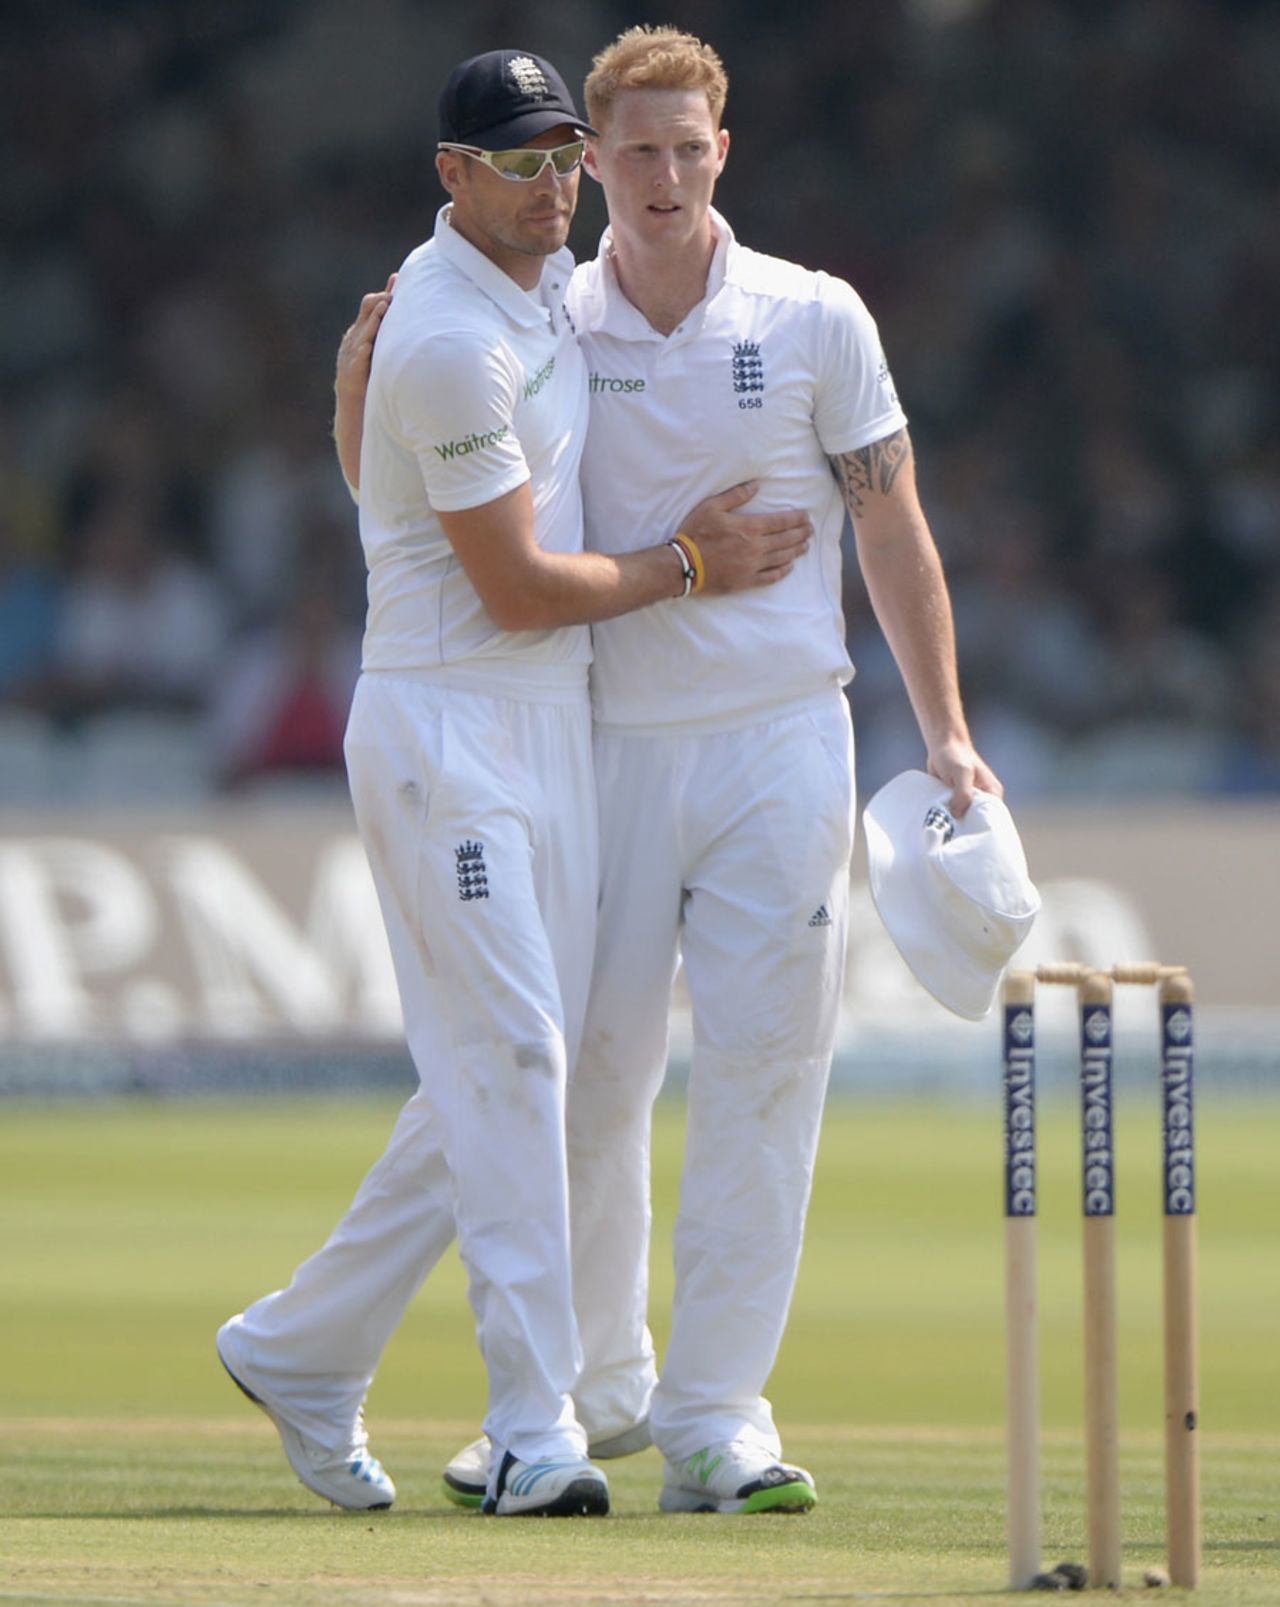 Ben Stokes is congratulated after dismissing Mohammed Shami, England v India, 2nd Investec Test, Lord's, 2nd day, July 18, 2014